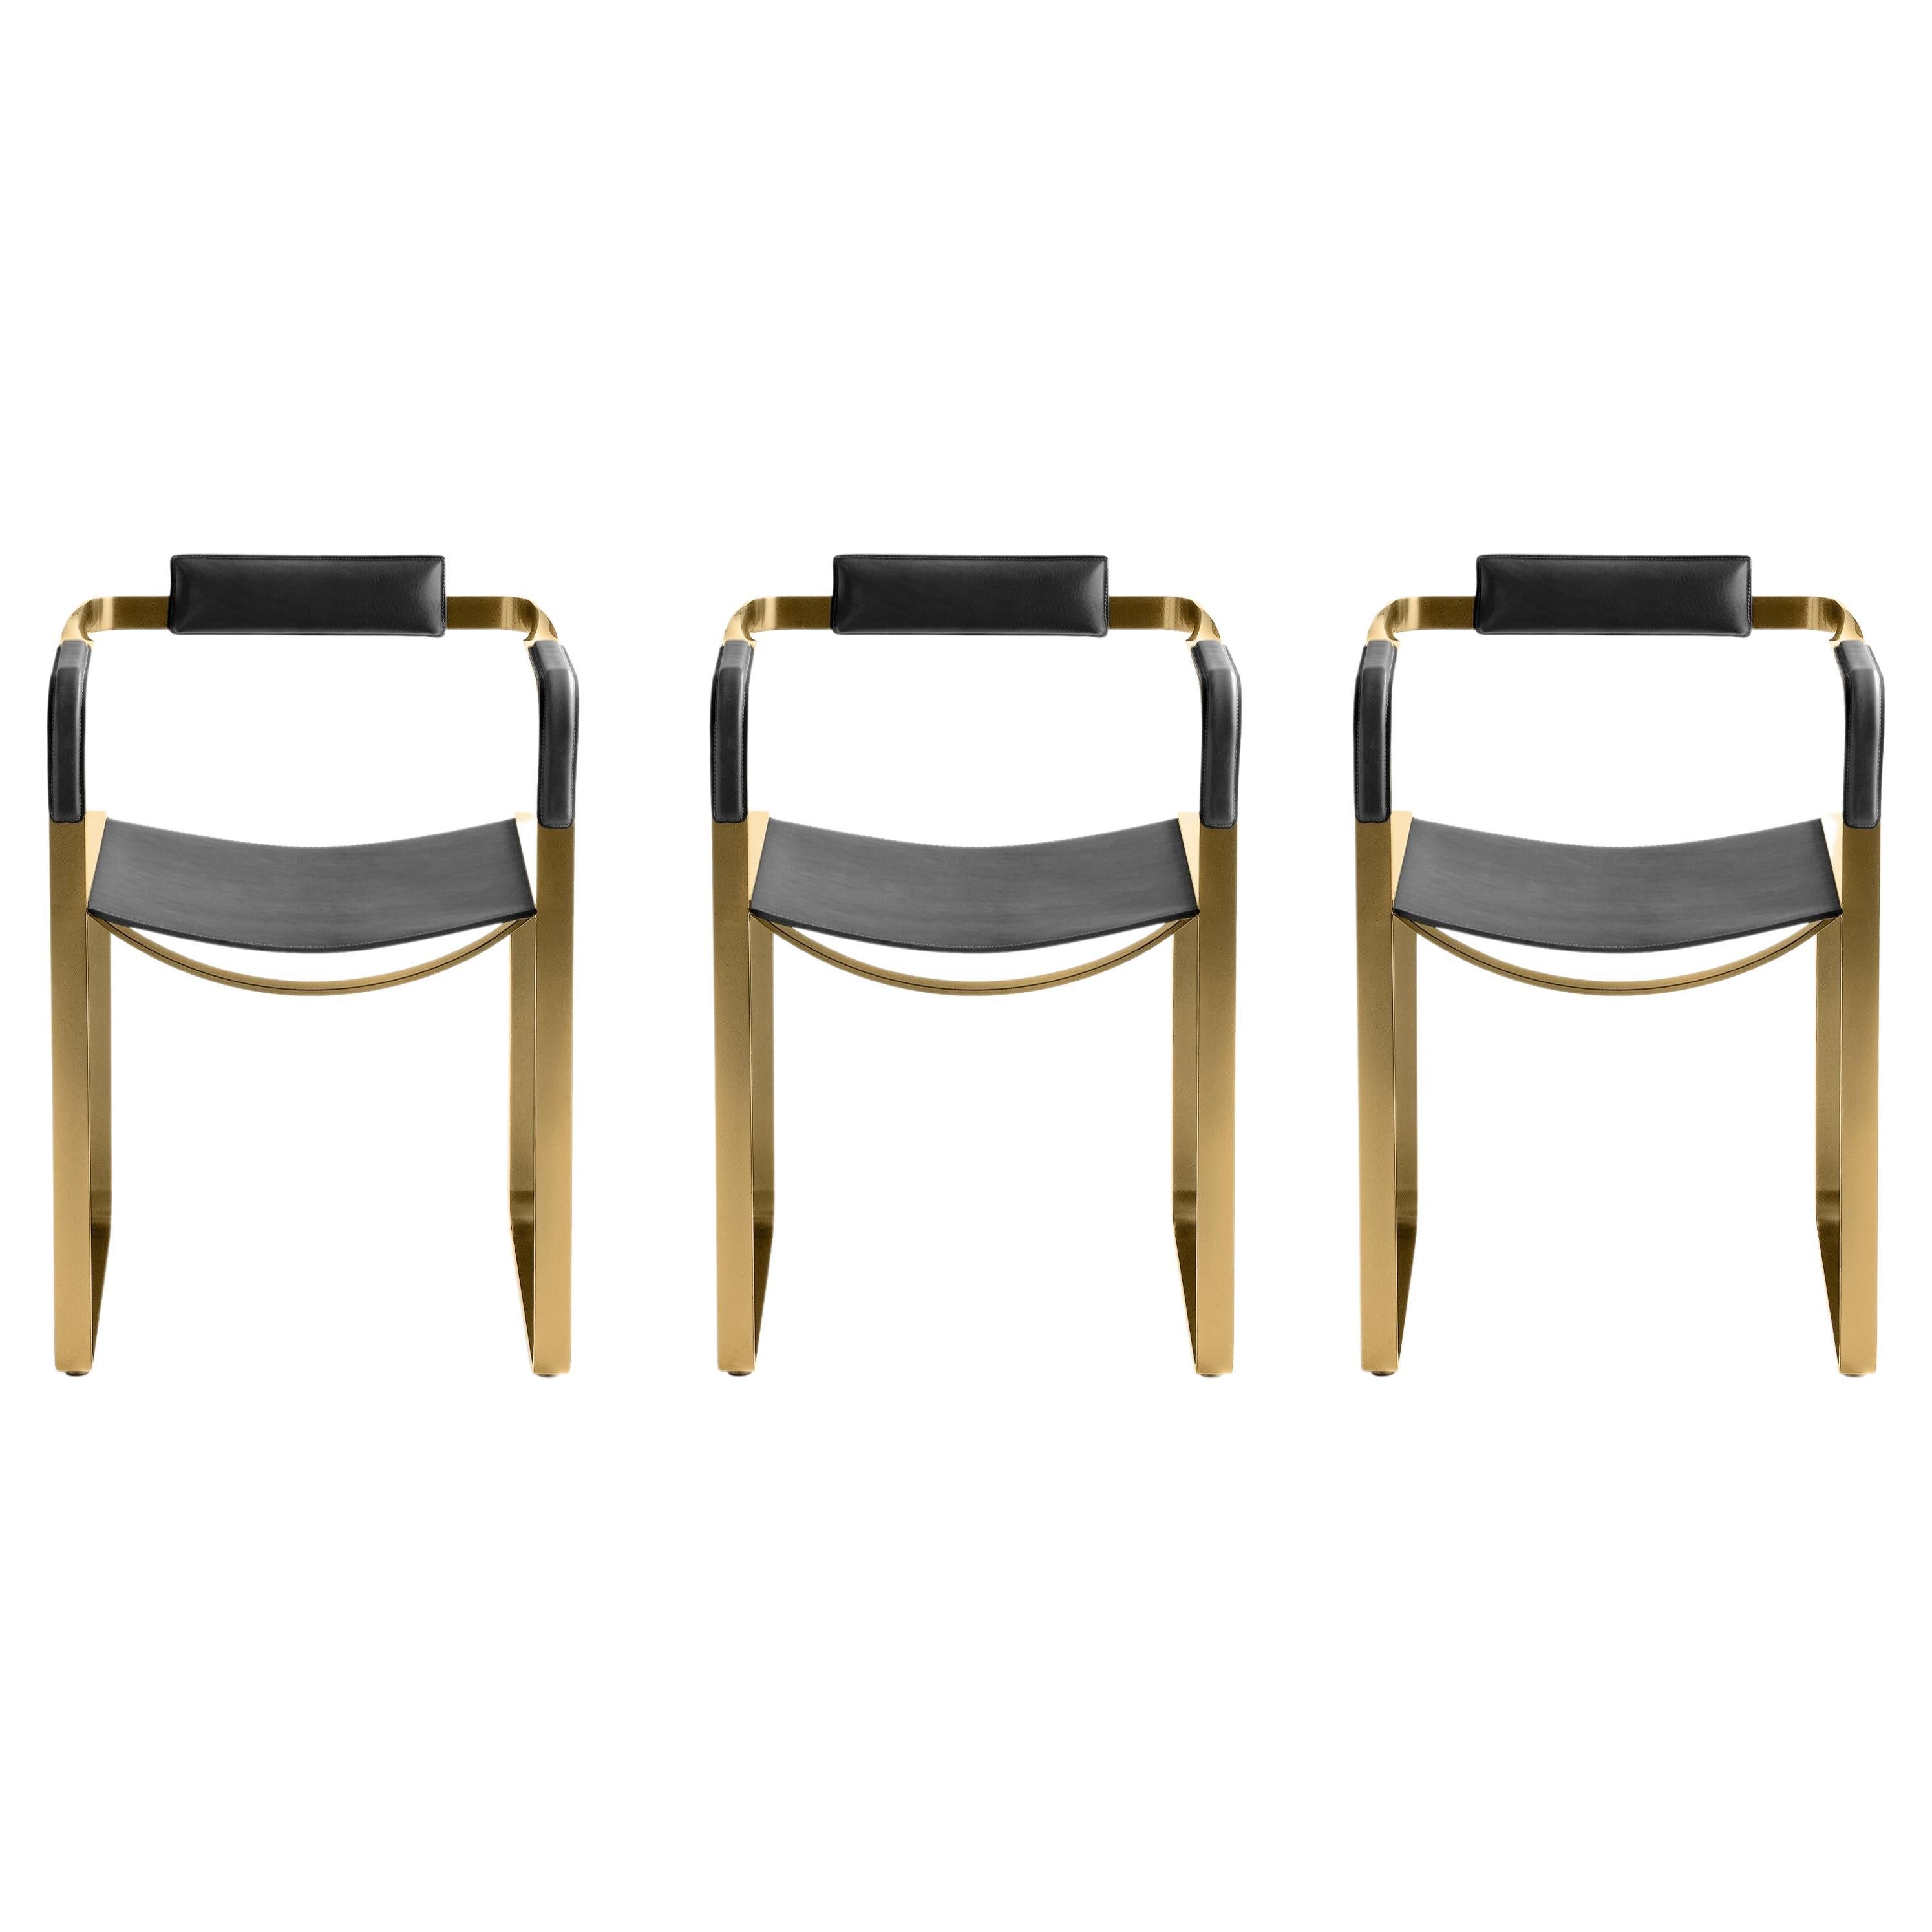 Set of 3 Armchair, Aged Brass Steel & Black Saddle Leather, Contemporary Style